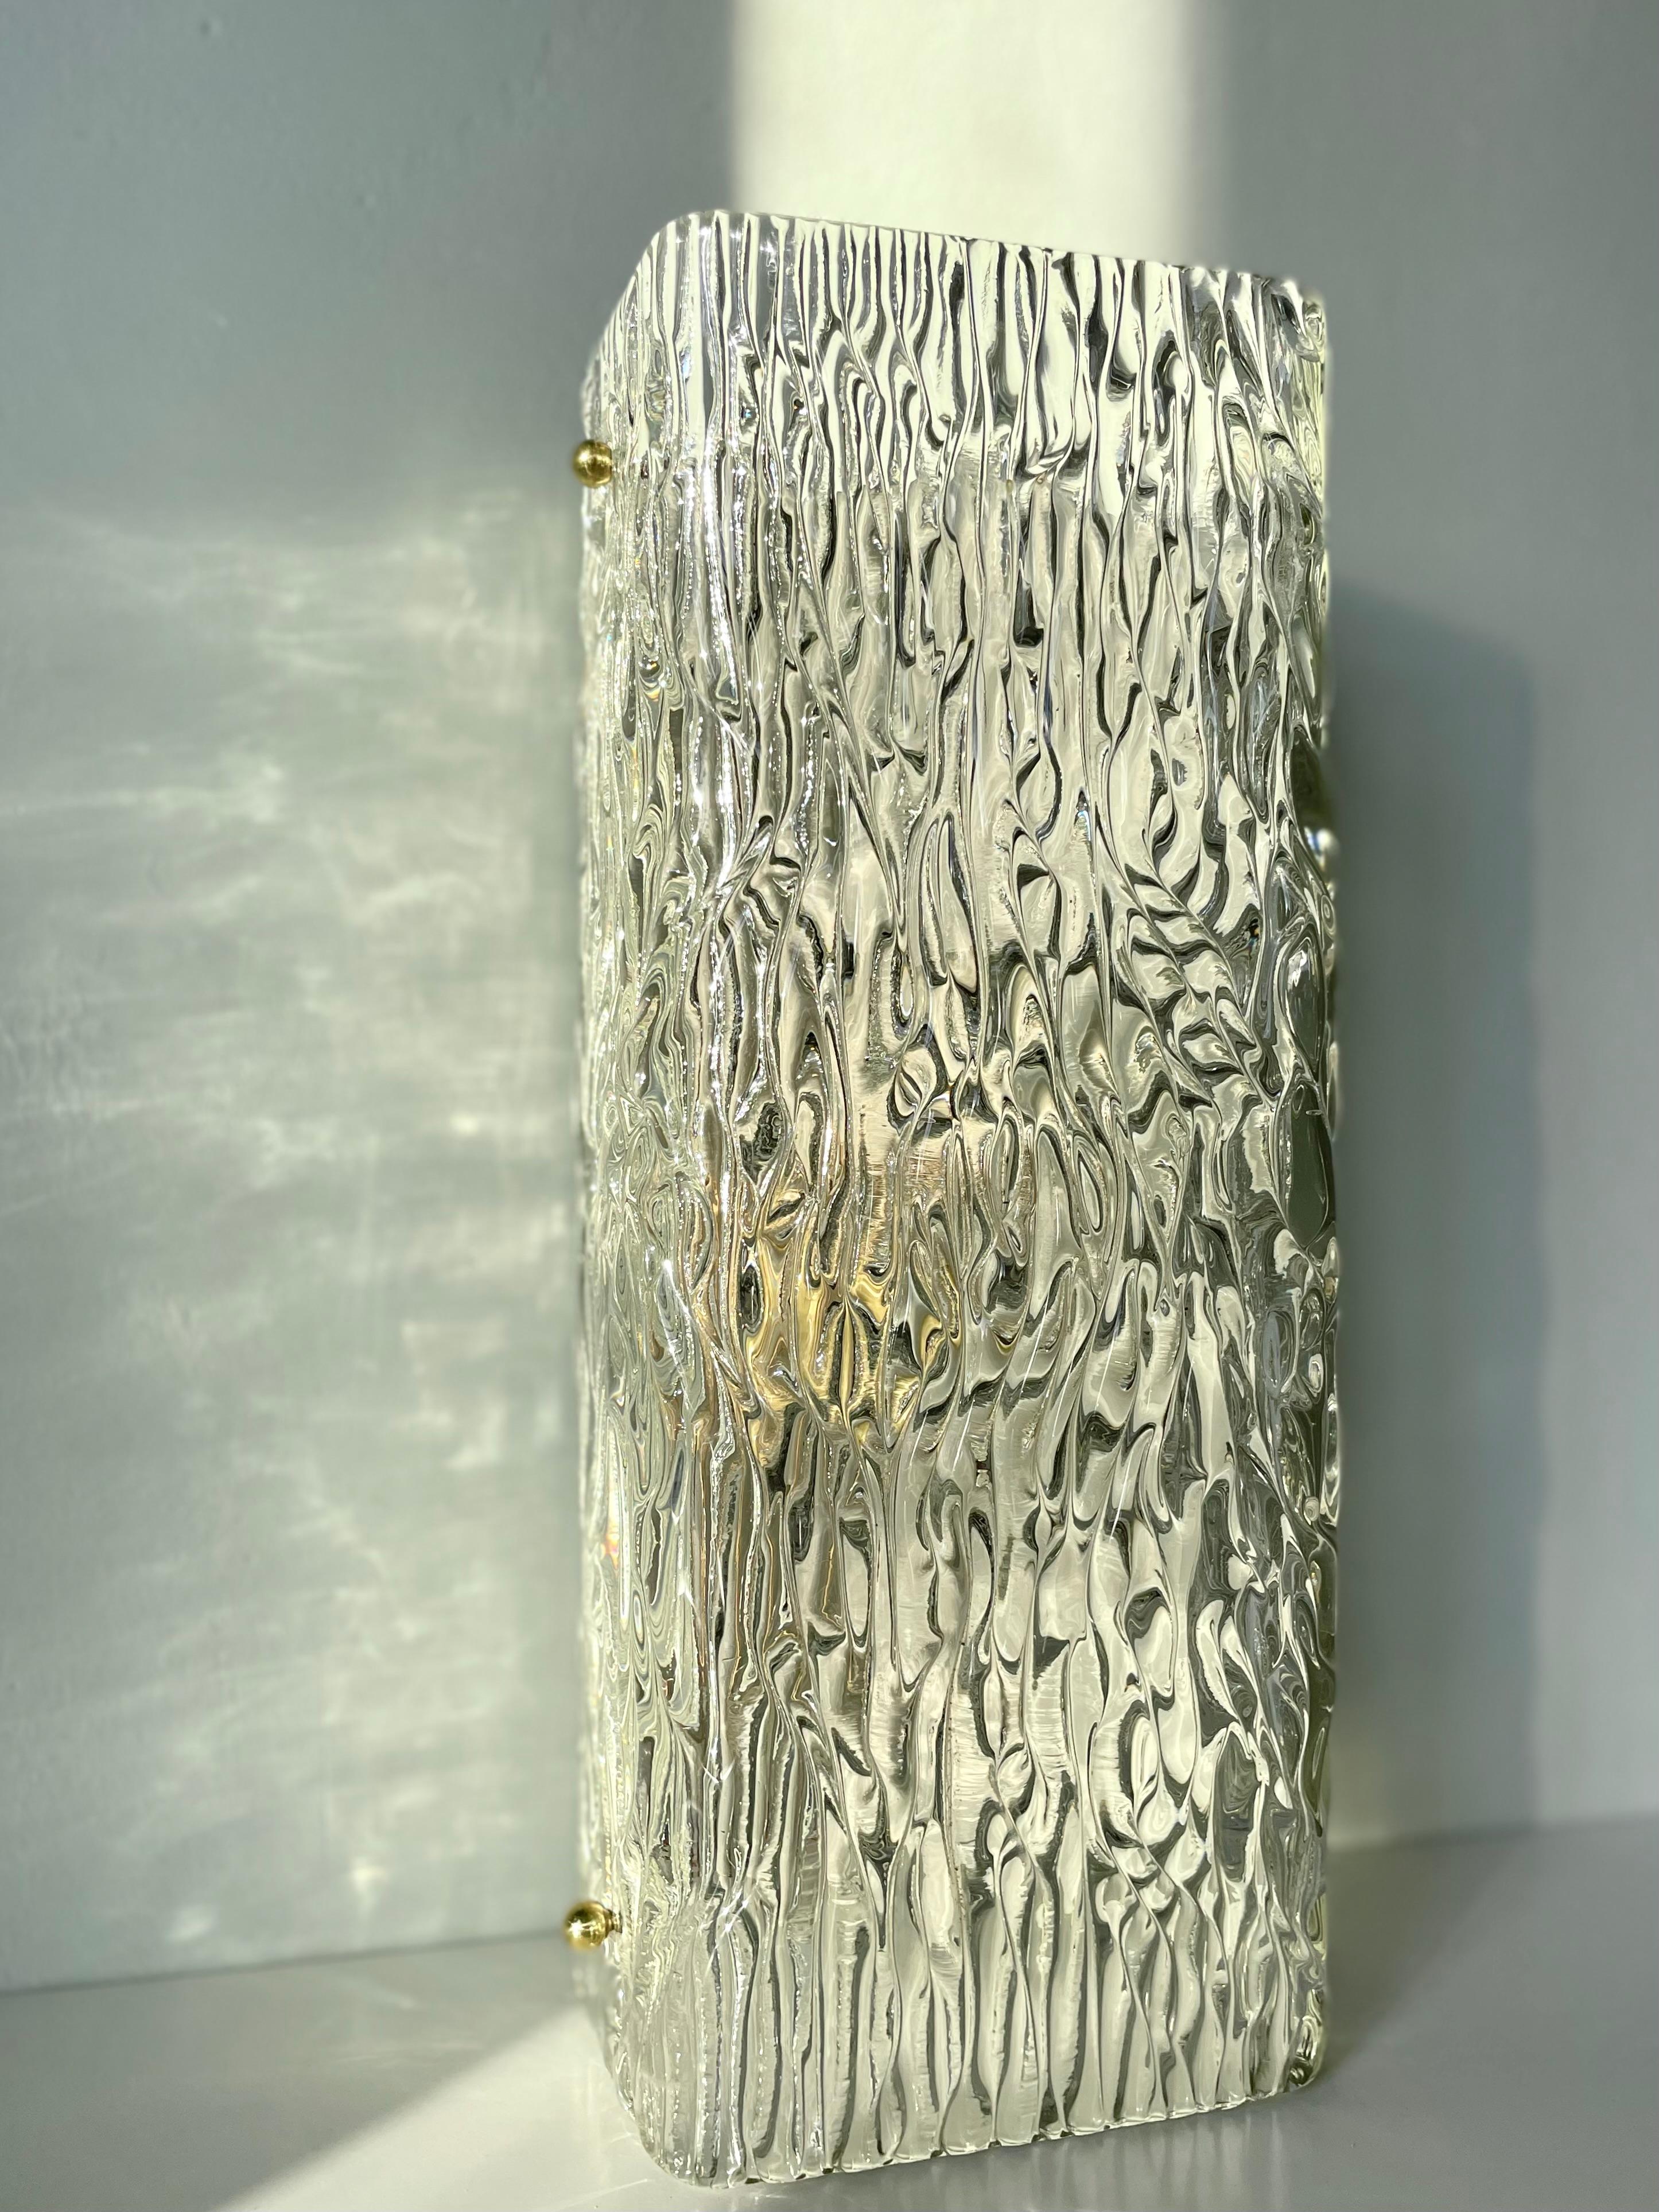 Large European rectangular Hollywood Regency midcentury crystal elongated wall light with shiny brass details manufactured in the 1950s. Clear smooth textured crystal art glass on white lacquered metal mount with two fittings for E14. Wired with